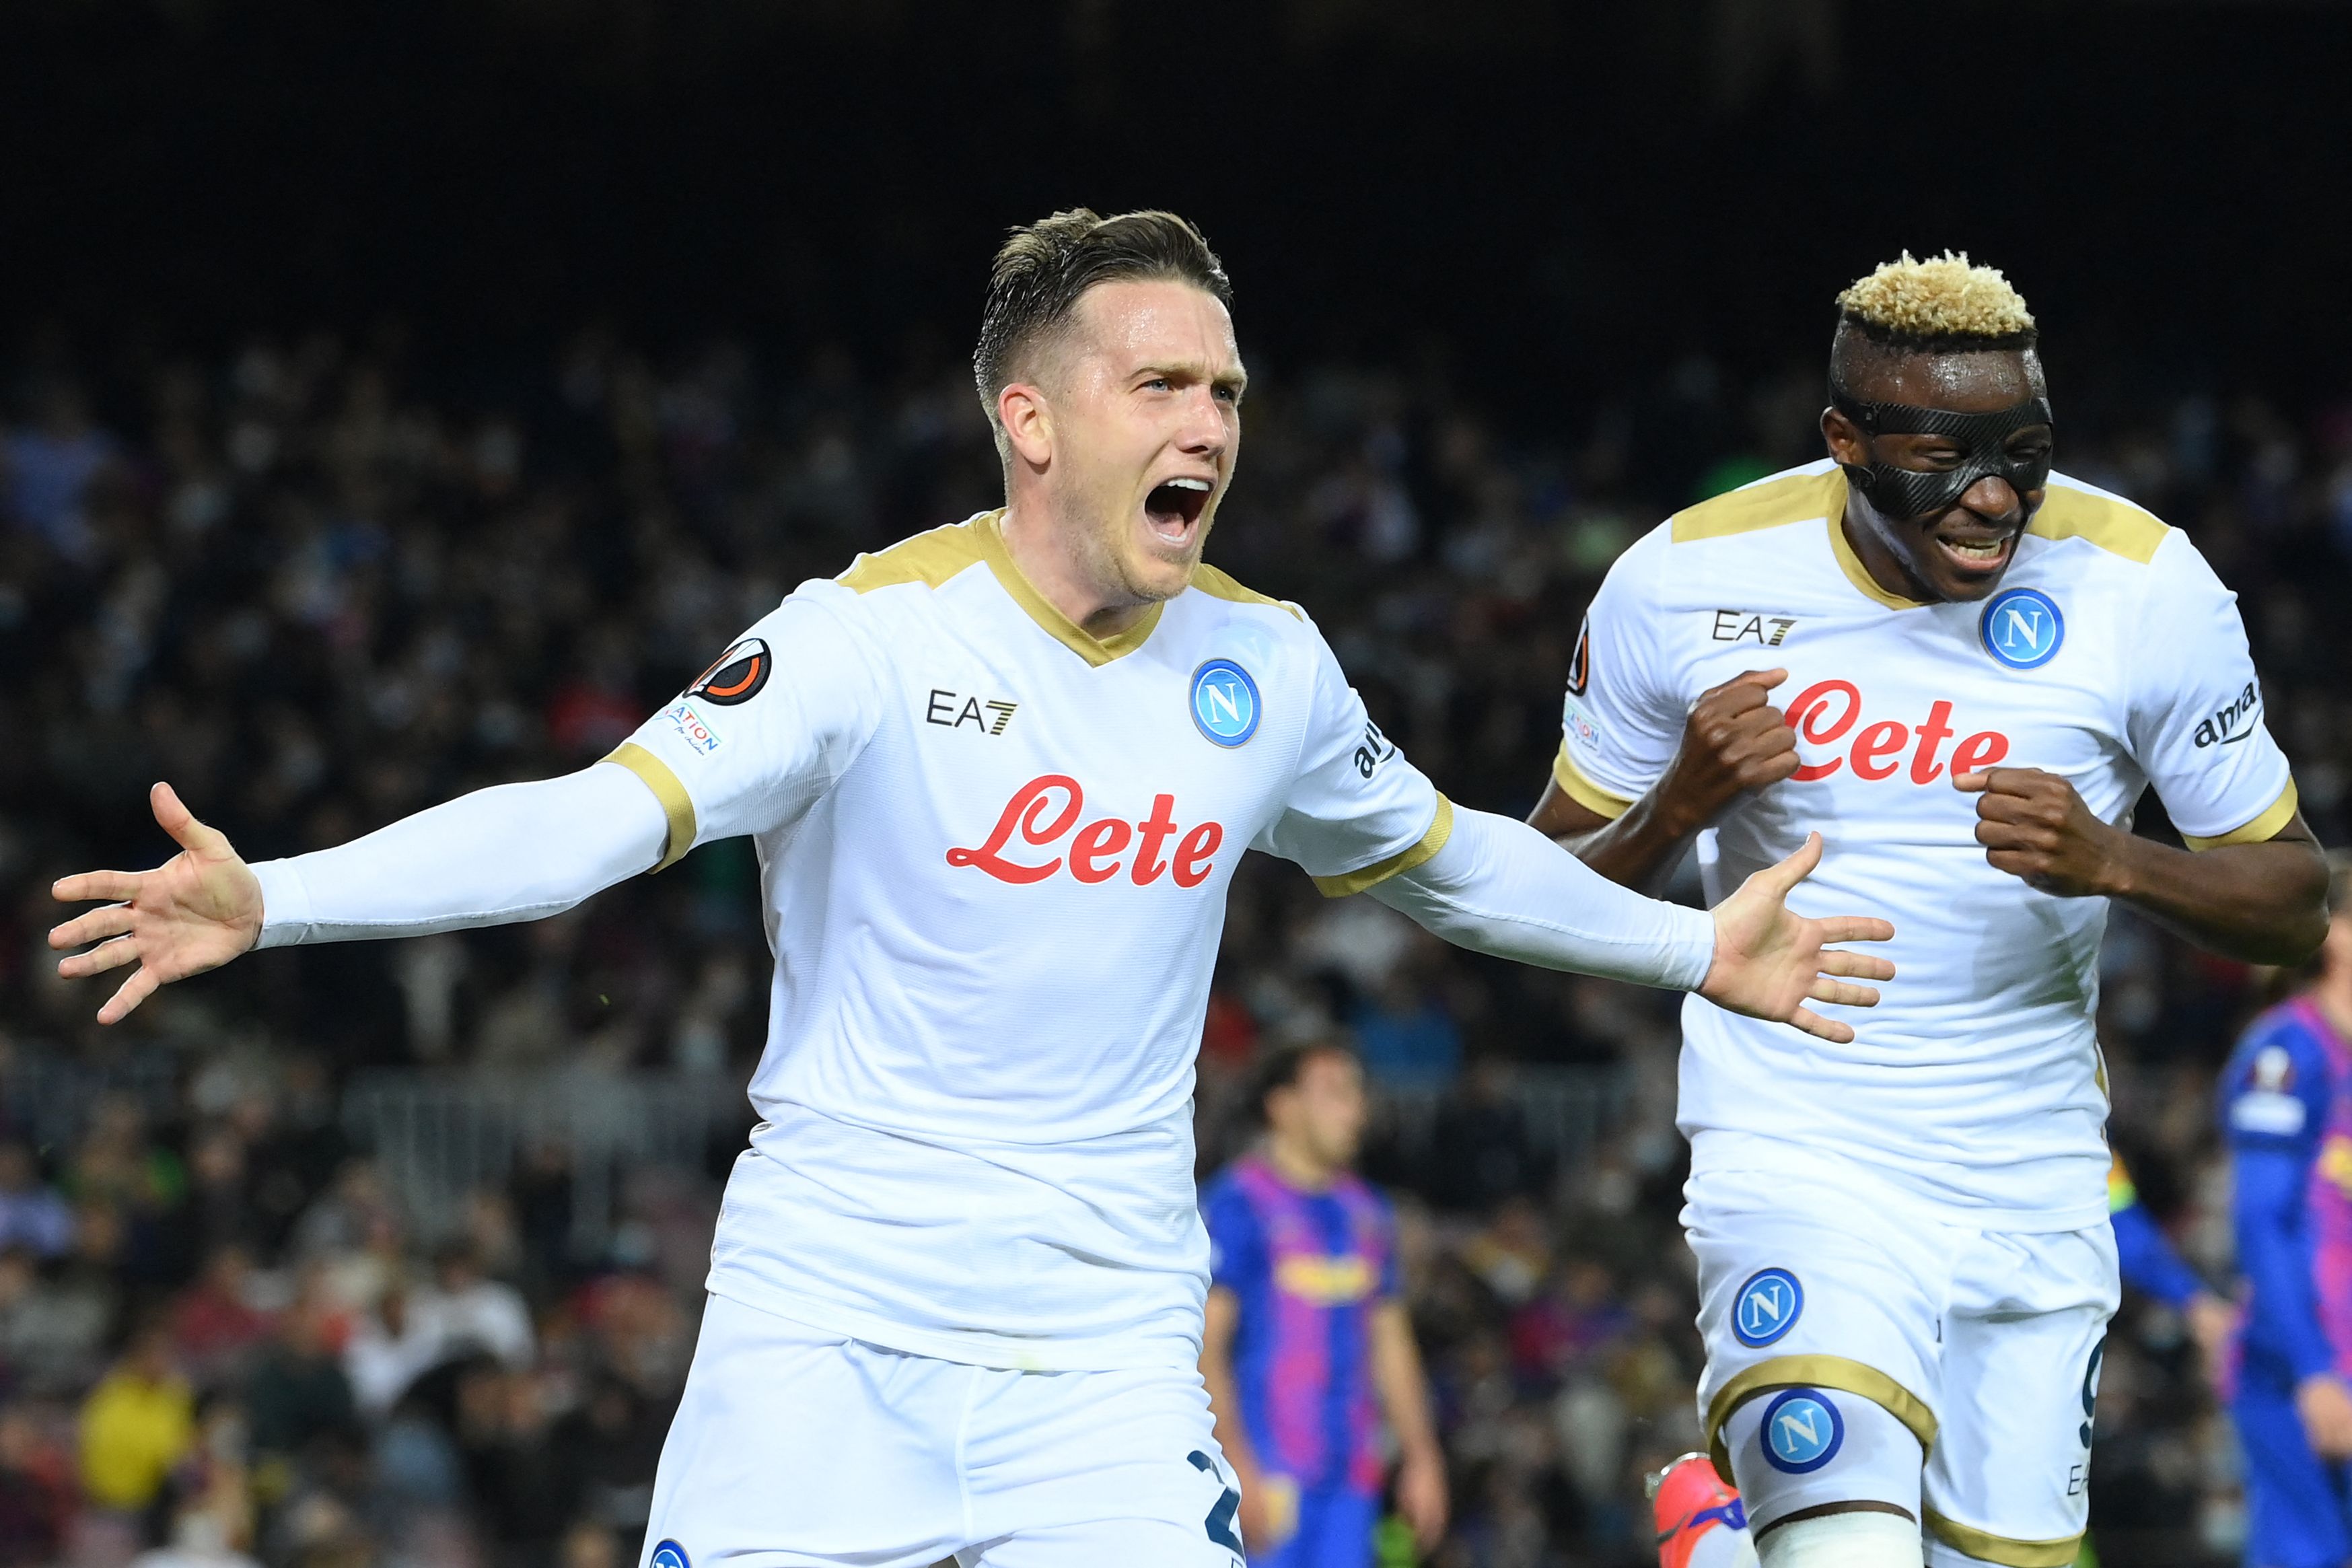 Barcelona 1-1 Napoli Highlights: Ferran Torres scores in the Europa League from the penalty spot to cancel out Napoli's early lead in the 1st Leg of the Round of 32